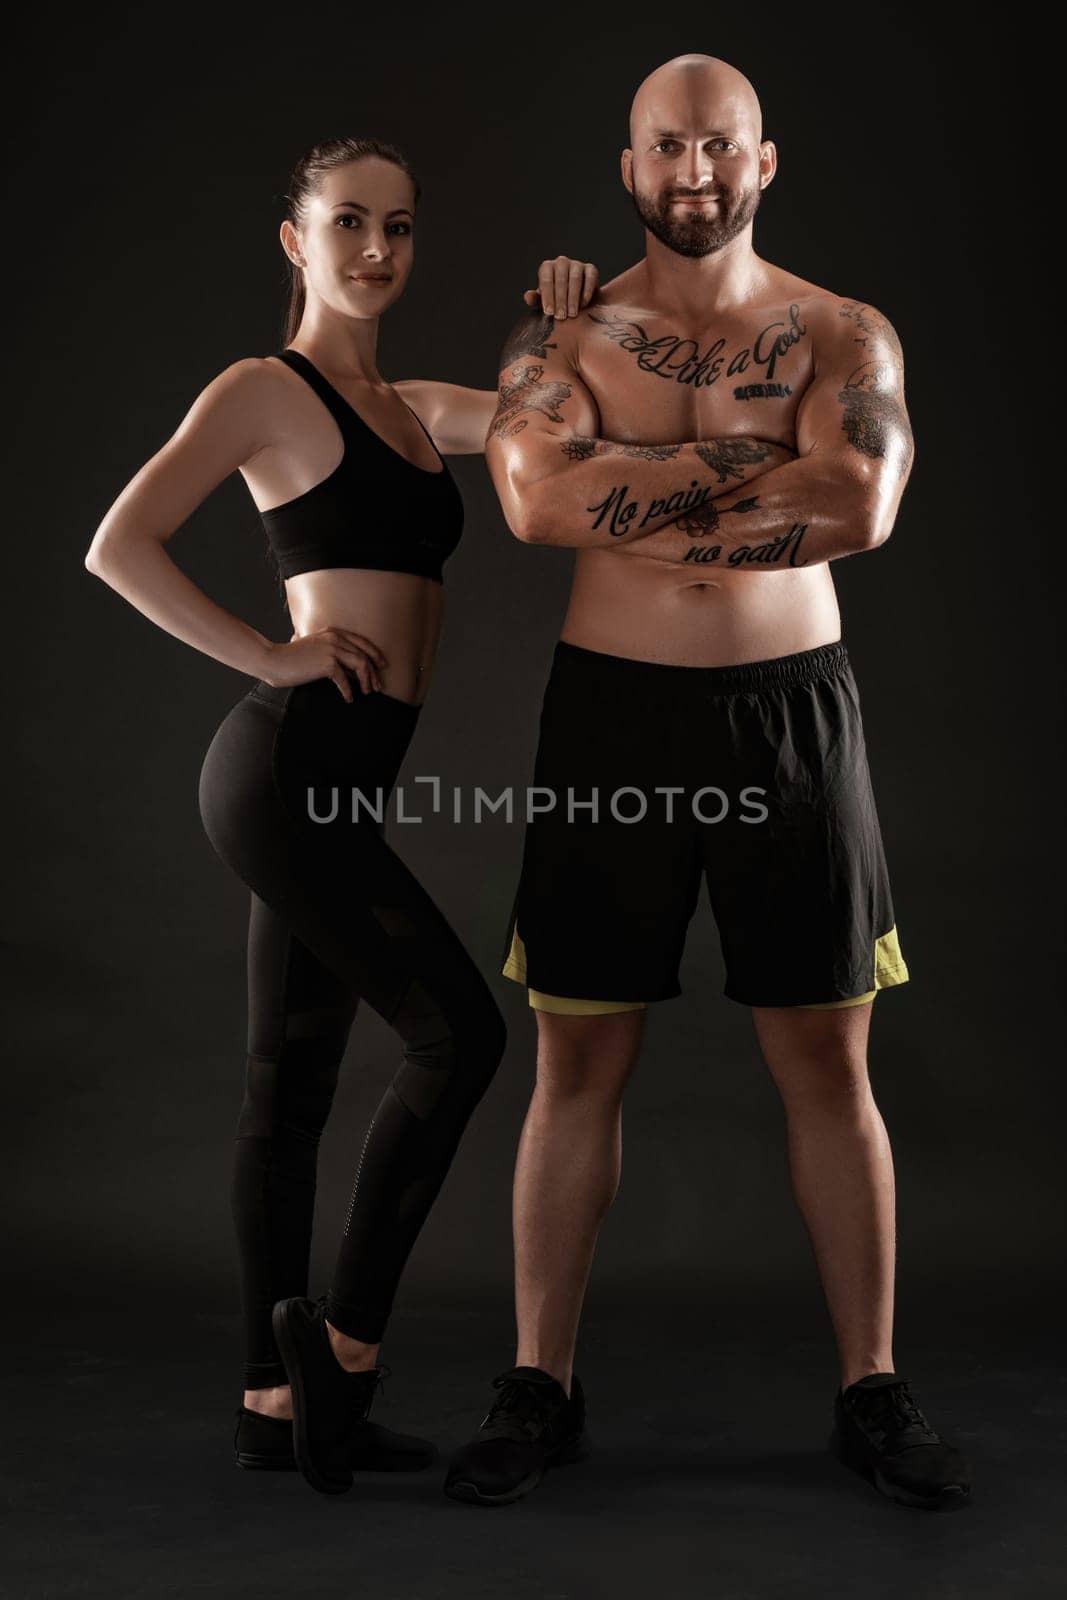 Good-looking bald, tattooed guy in black shorts and sneakers with attractive brunette girl in leggings and top are posing on black background and looking at the camera. Fitness couple, chic muscular bodies, gym concept. The love story.